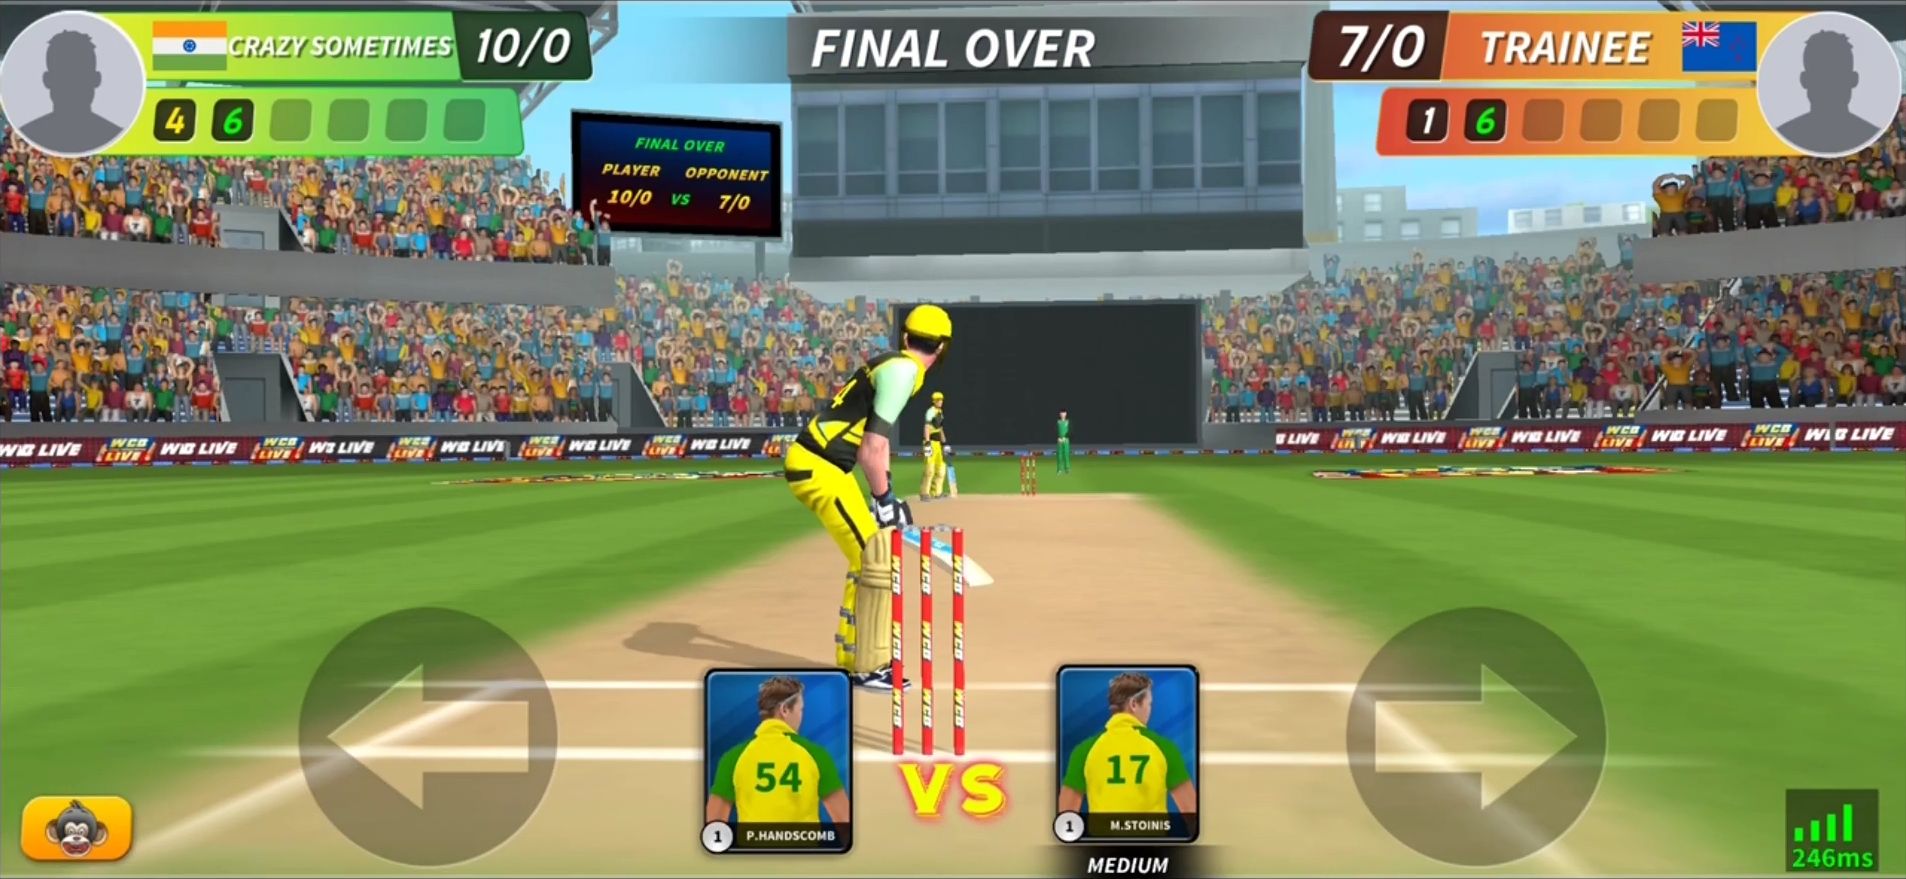 WCB LIVE Cricket Multiplayer PvP Cricket Clash Download APK for Android ( Free) mob